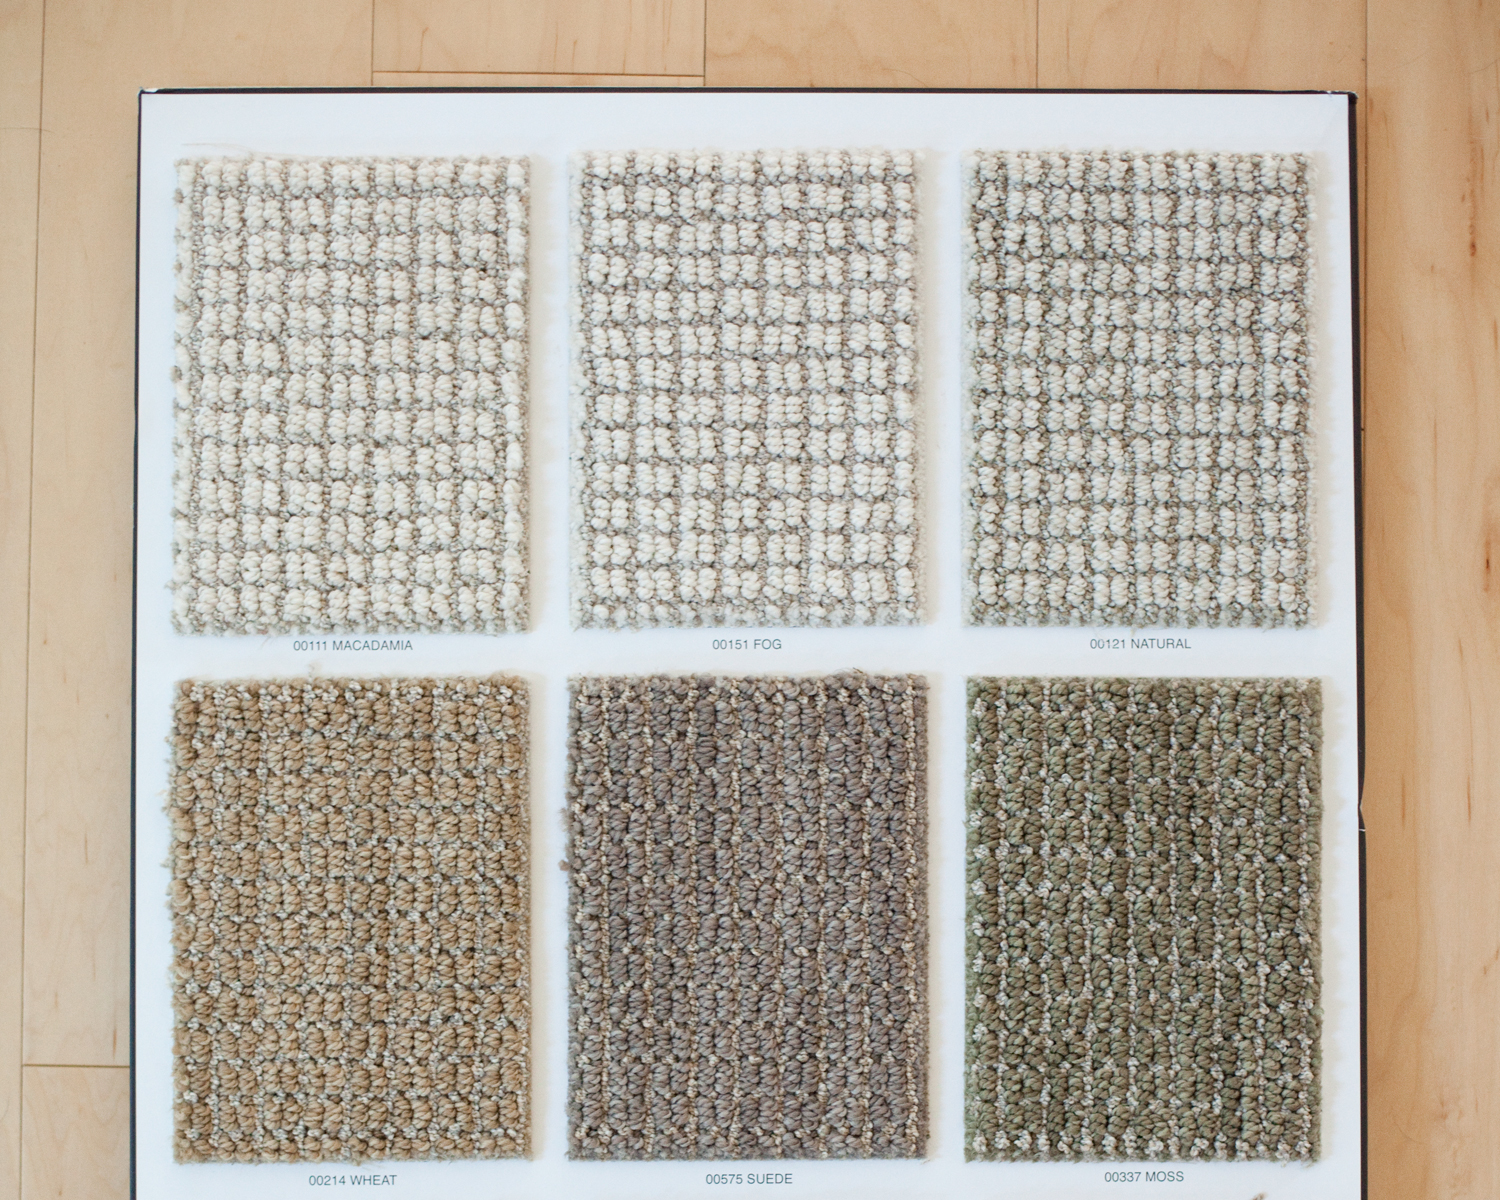 Stainmaster carpet options